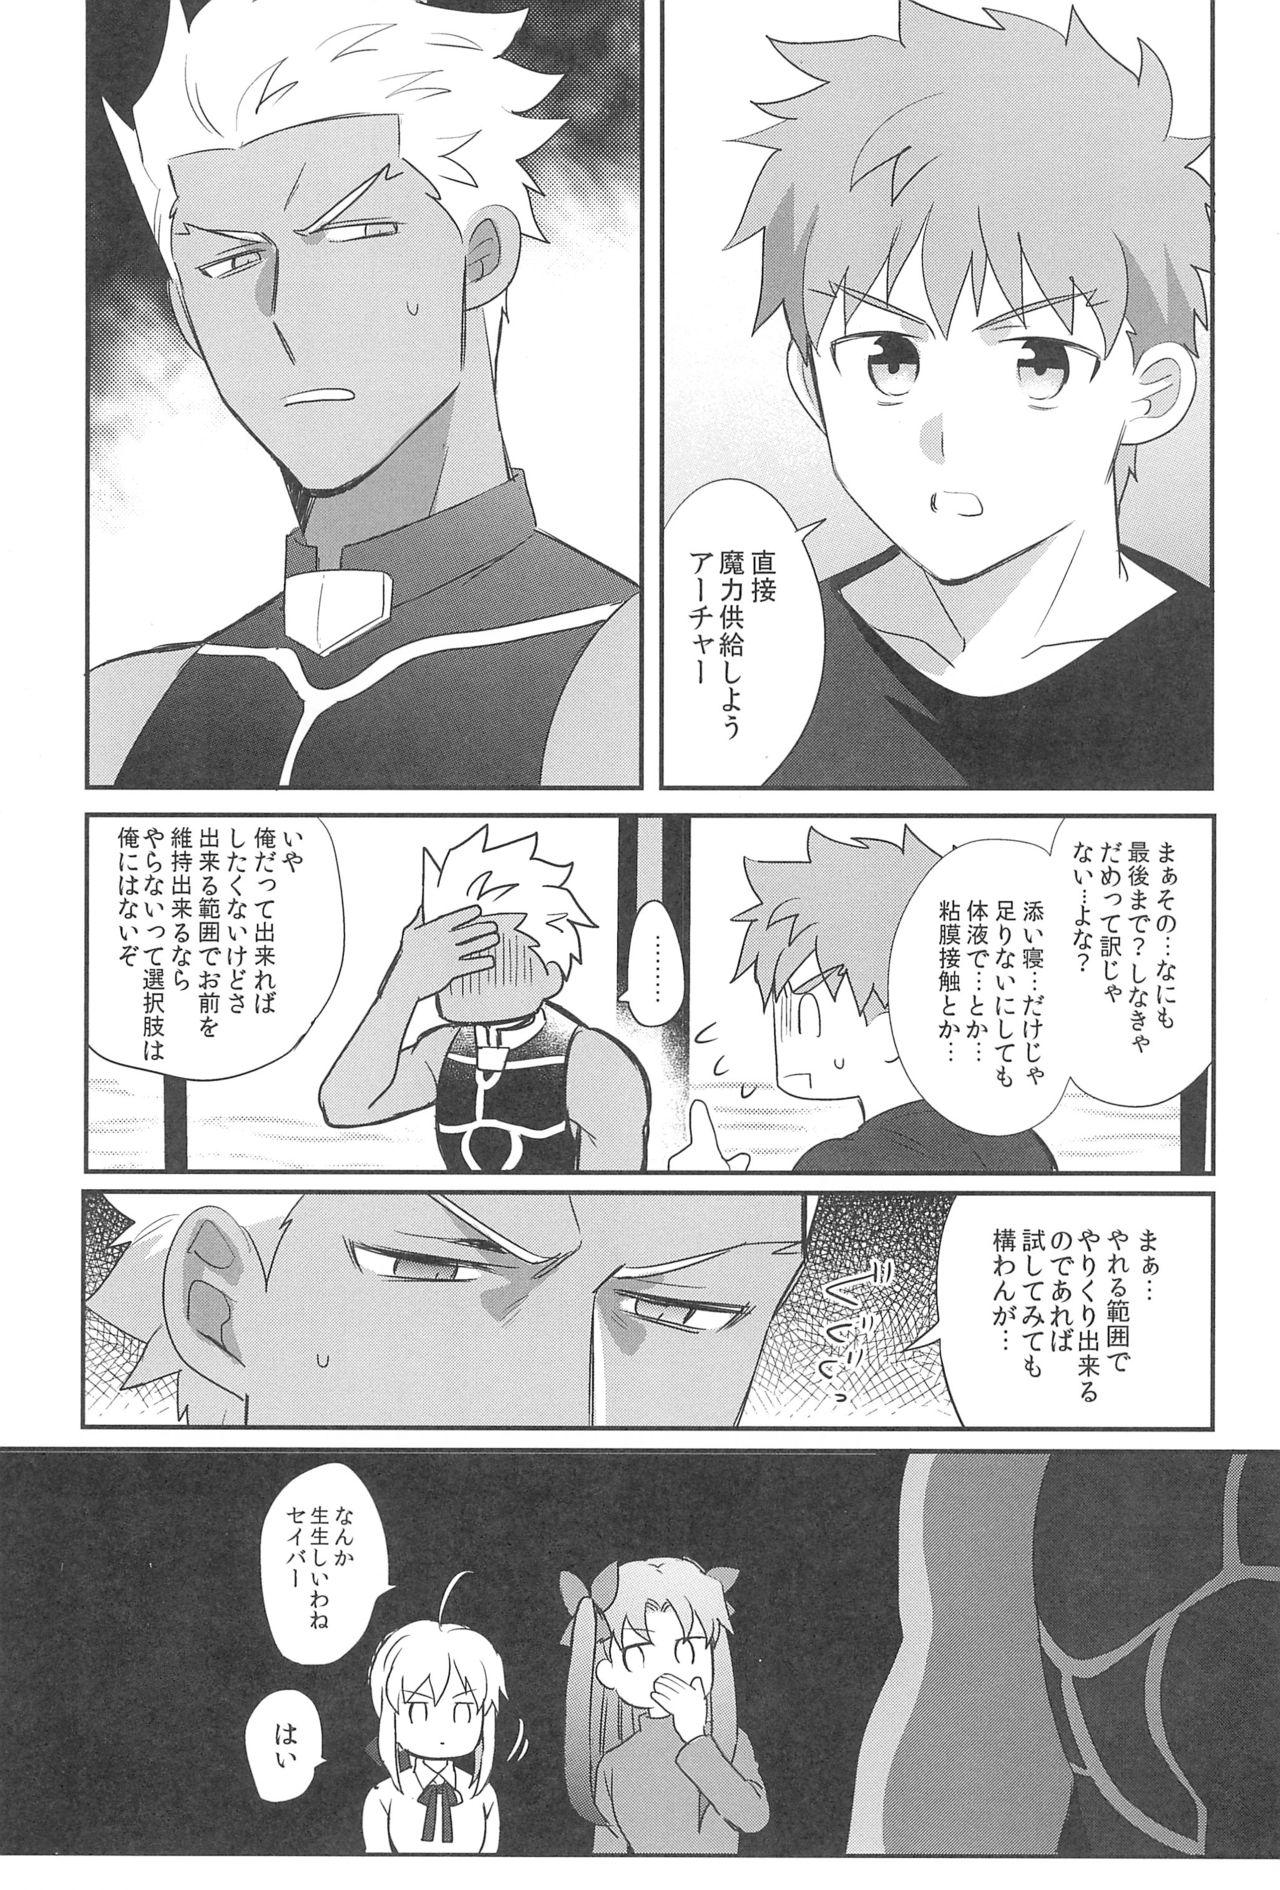 Gemendo Honban NG! - Fate stay night Passion - Page 7